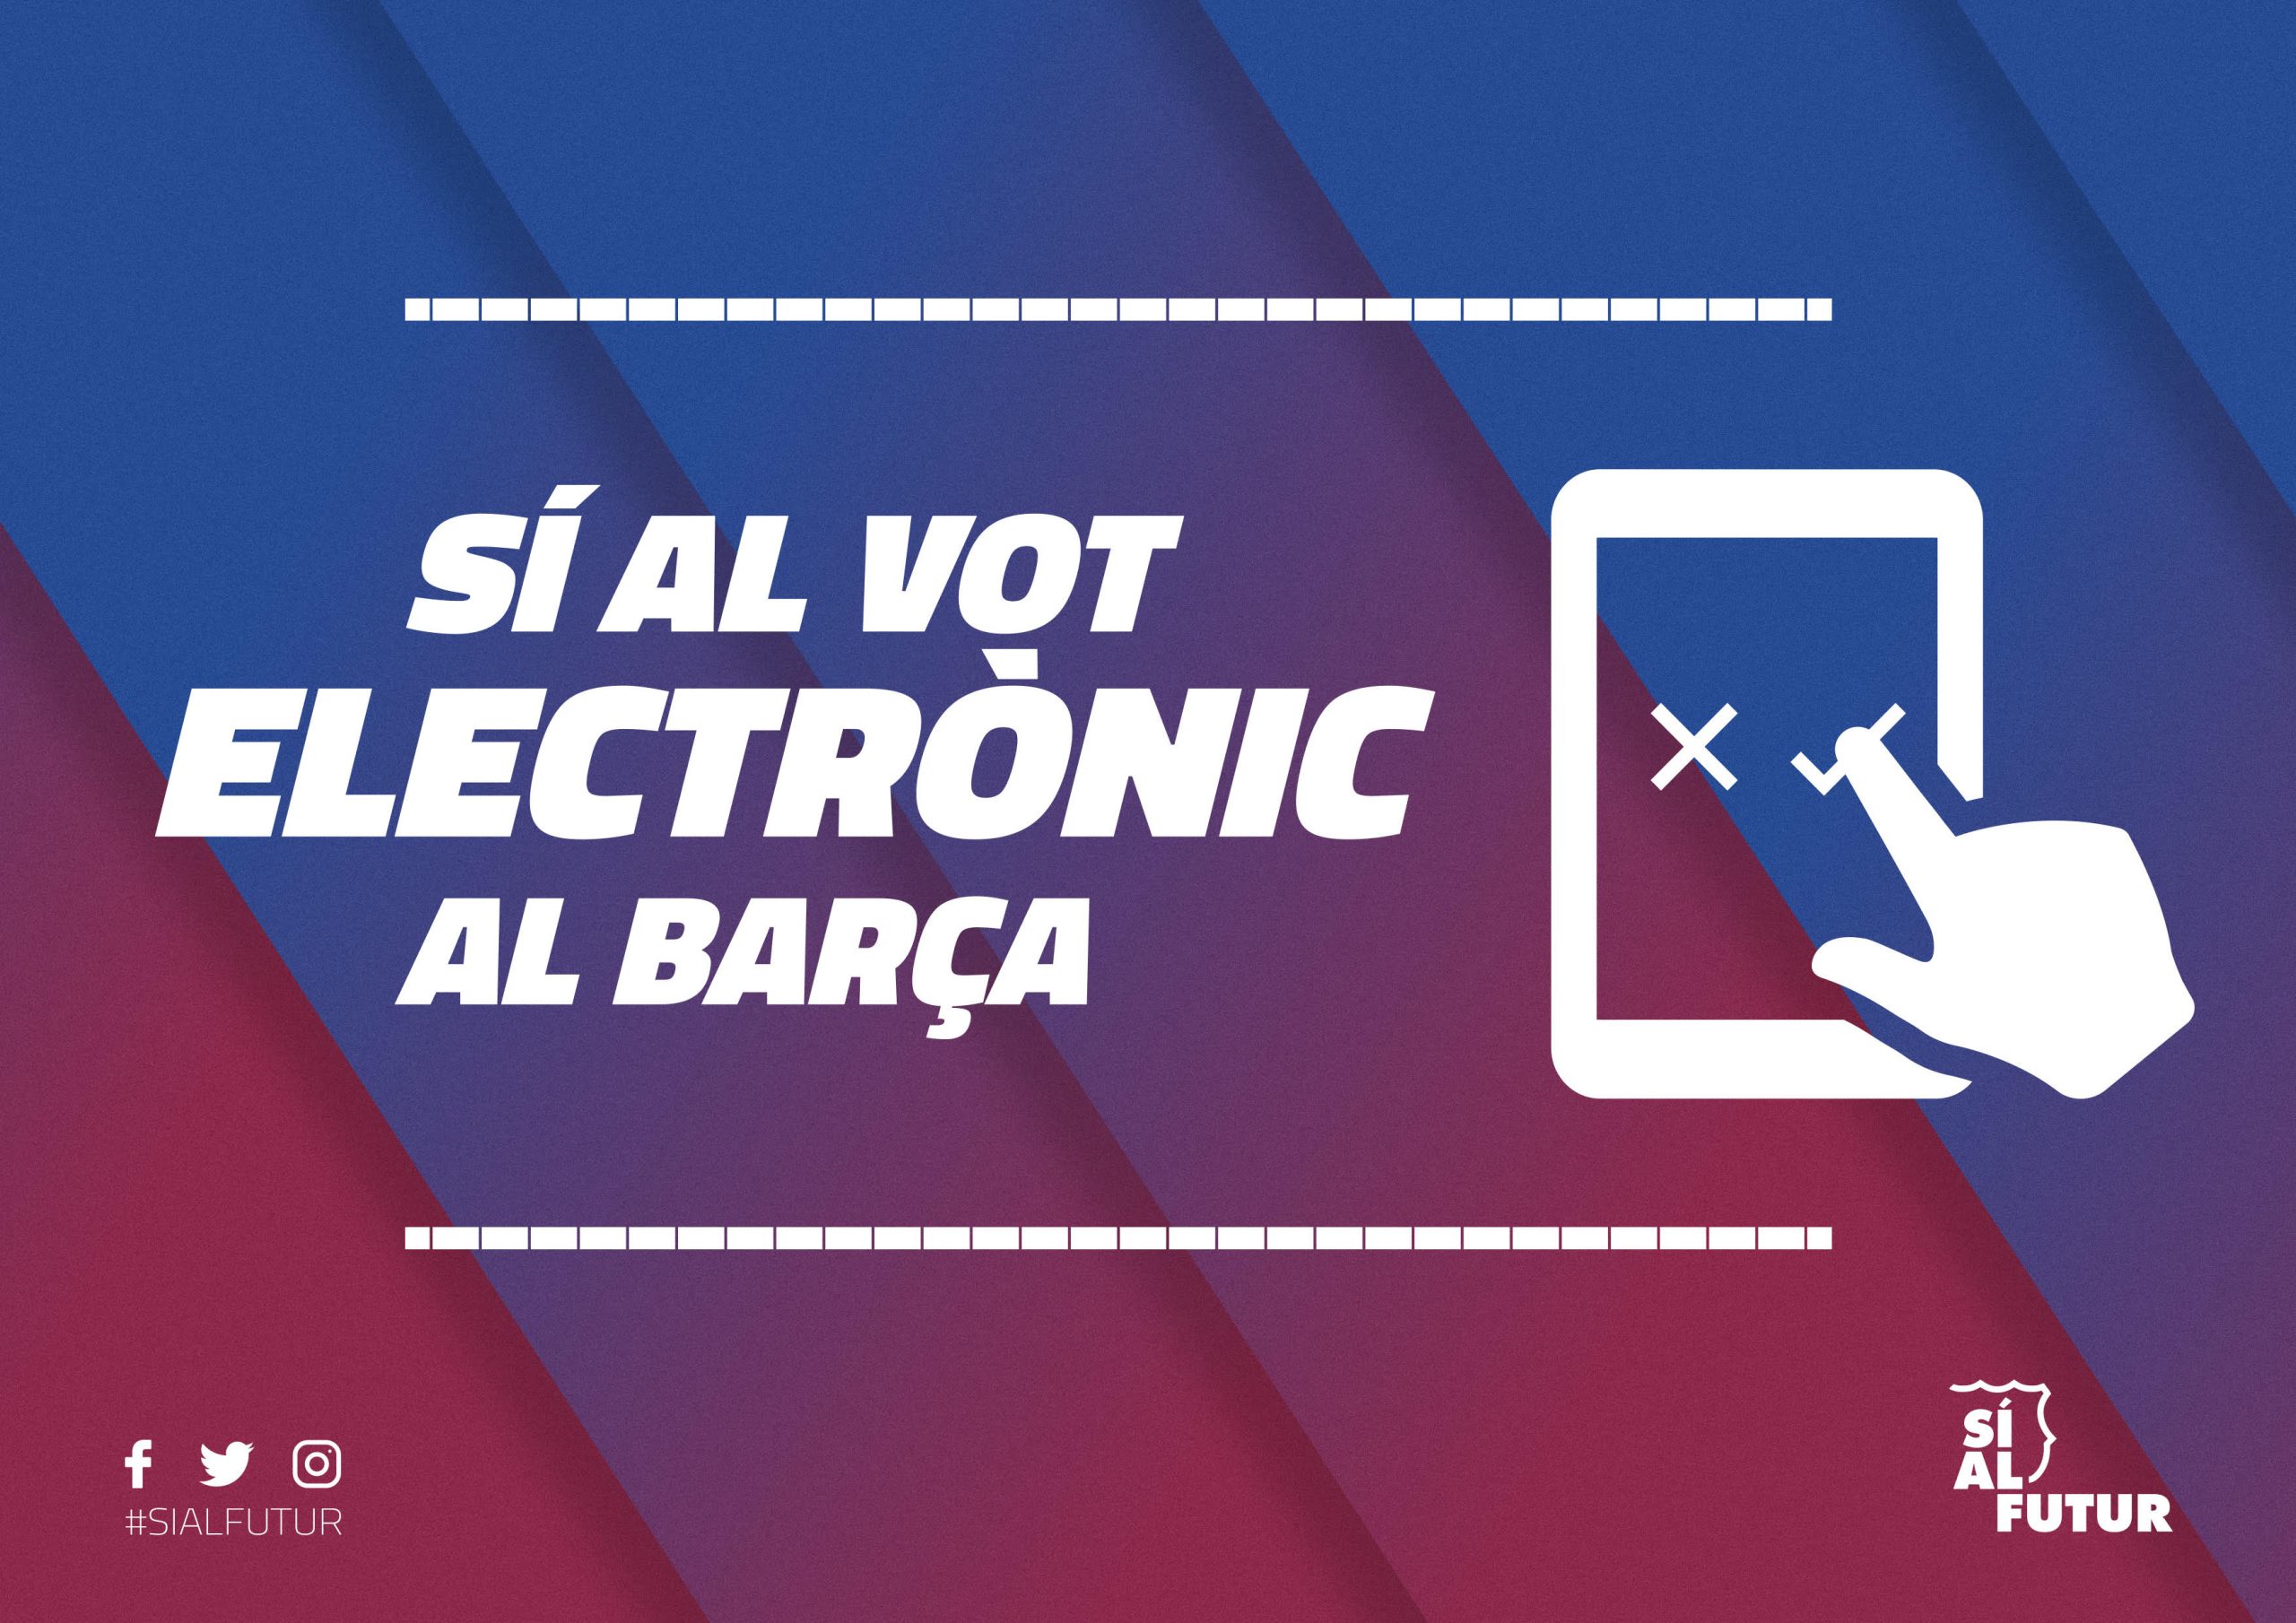 Sí al futur promotes a collection of 3,253 Barça members’ signatures for the October Delegates’ Assembly with a view to approving the use of electronic vote in the Club